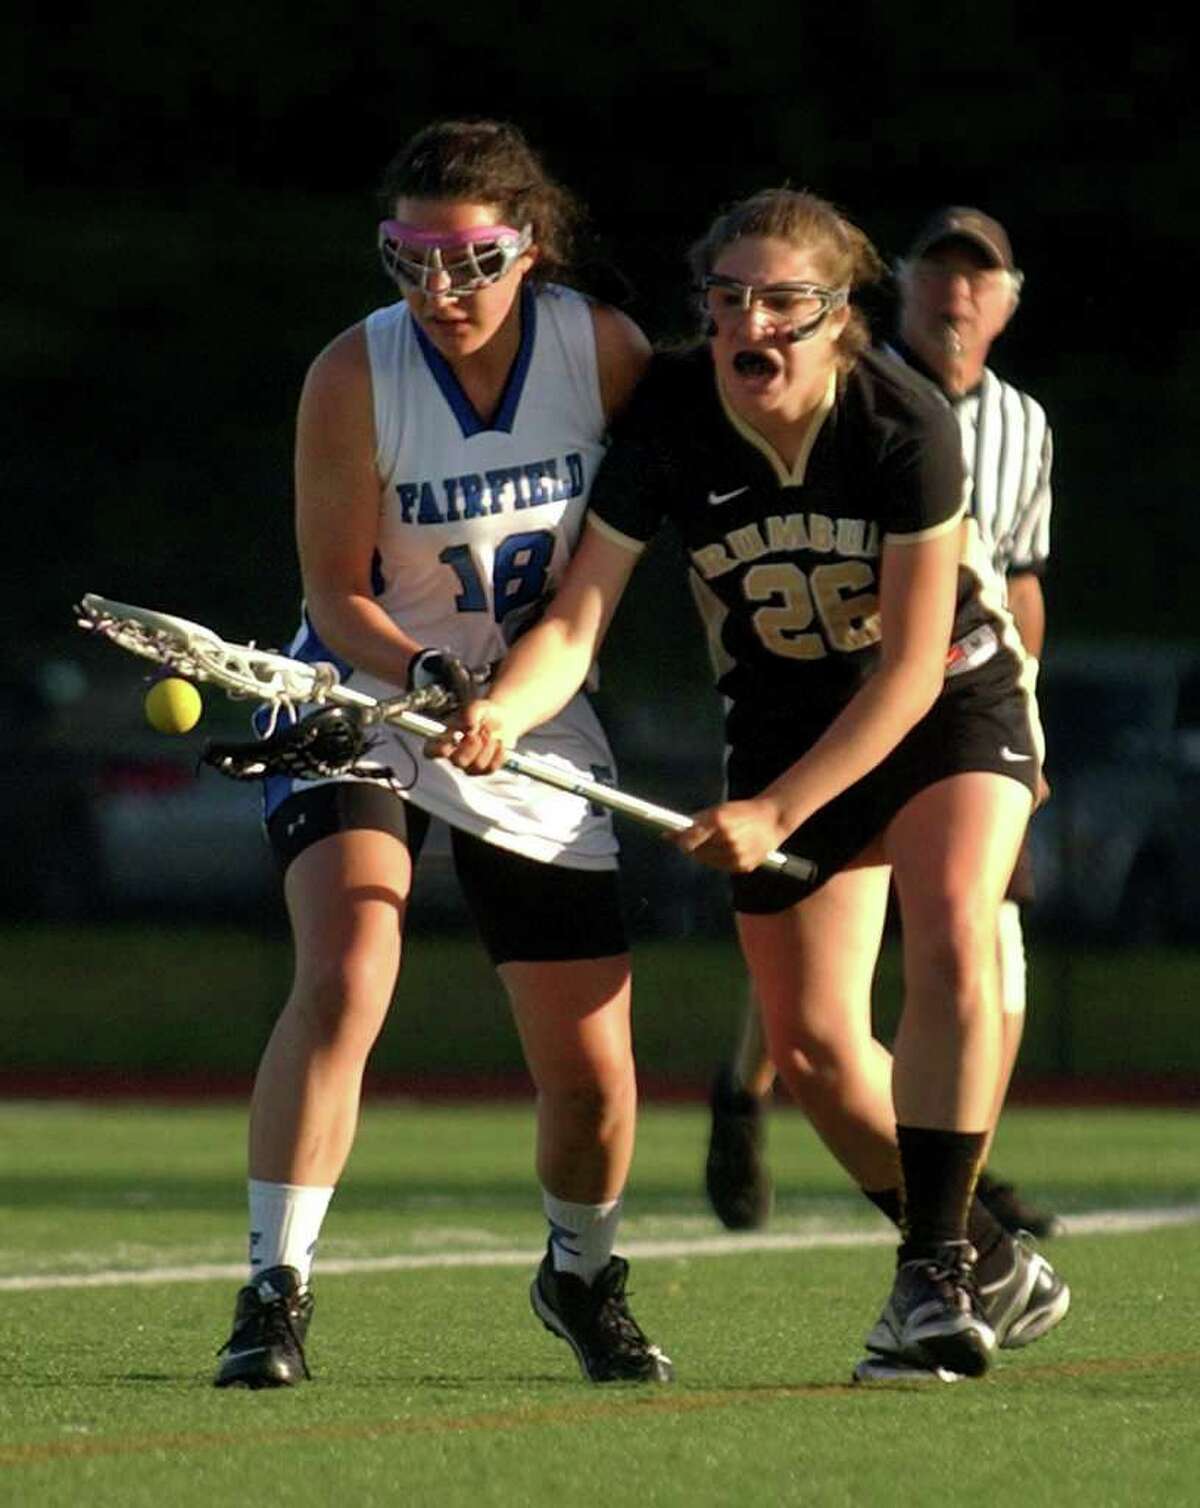 Fairfield Ludlowe's #18 Meredith Petralia, left, and, Trumbull's #26 Ally Tuozzoli, scramble for the ball, during girls lacrosse action in Fairfield, Conn. on May 10, 2011.